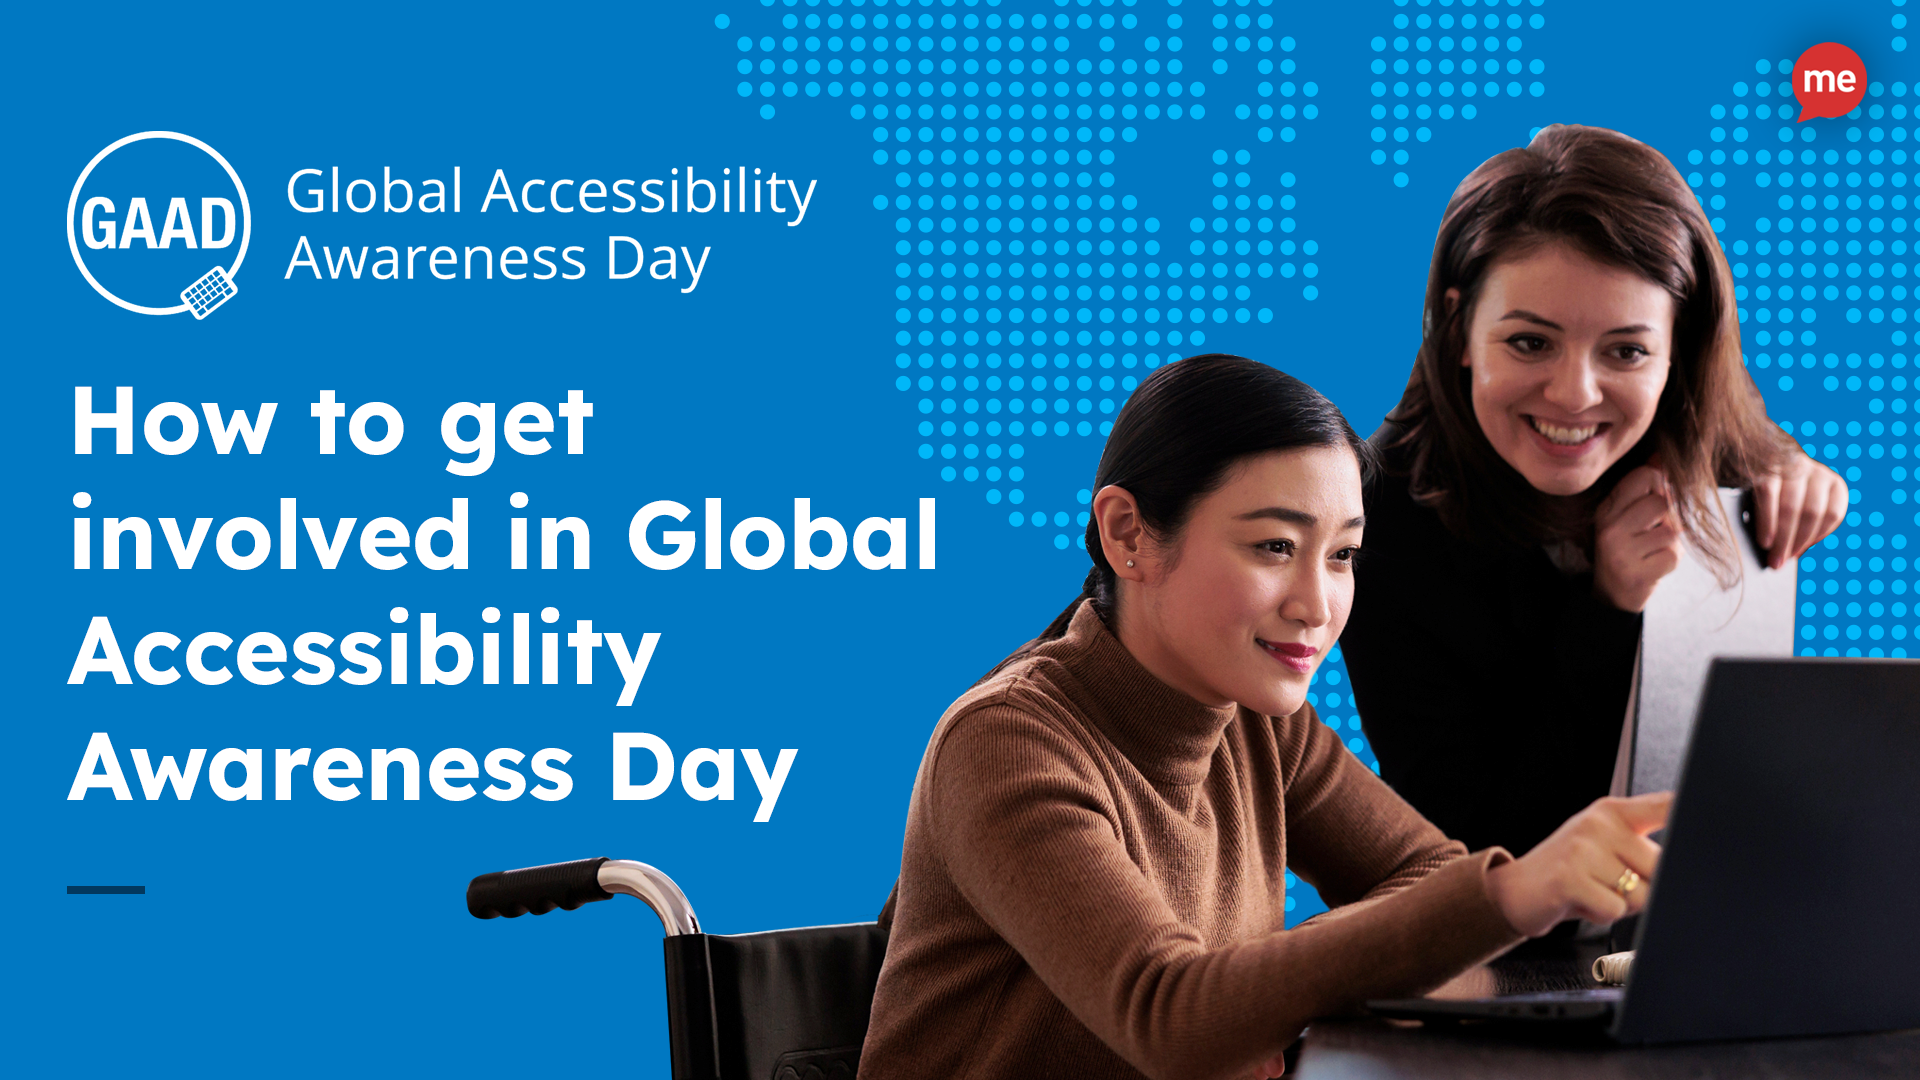 How to get involved in Global Accessibility Awareness Day.